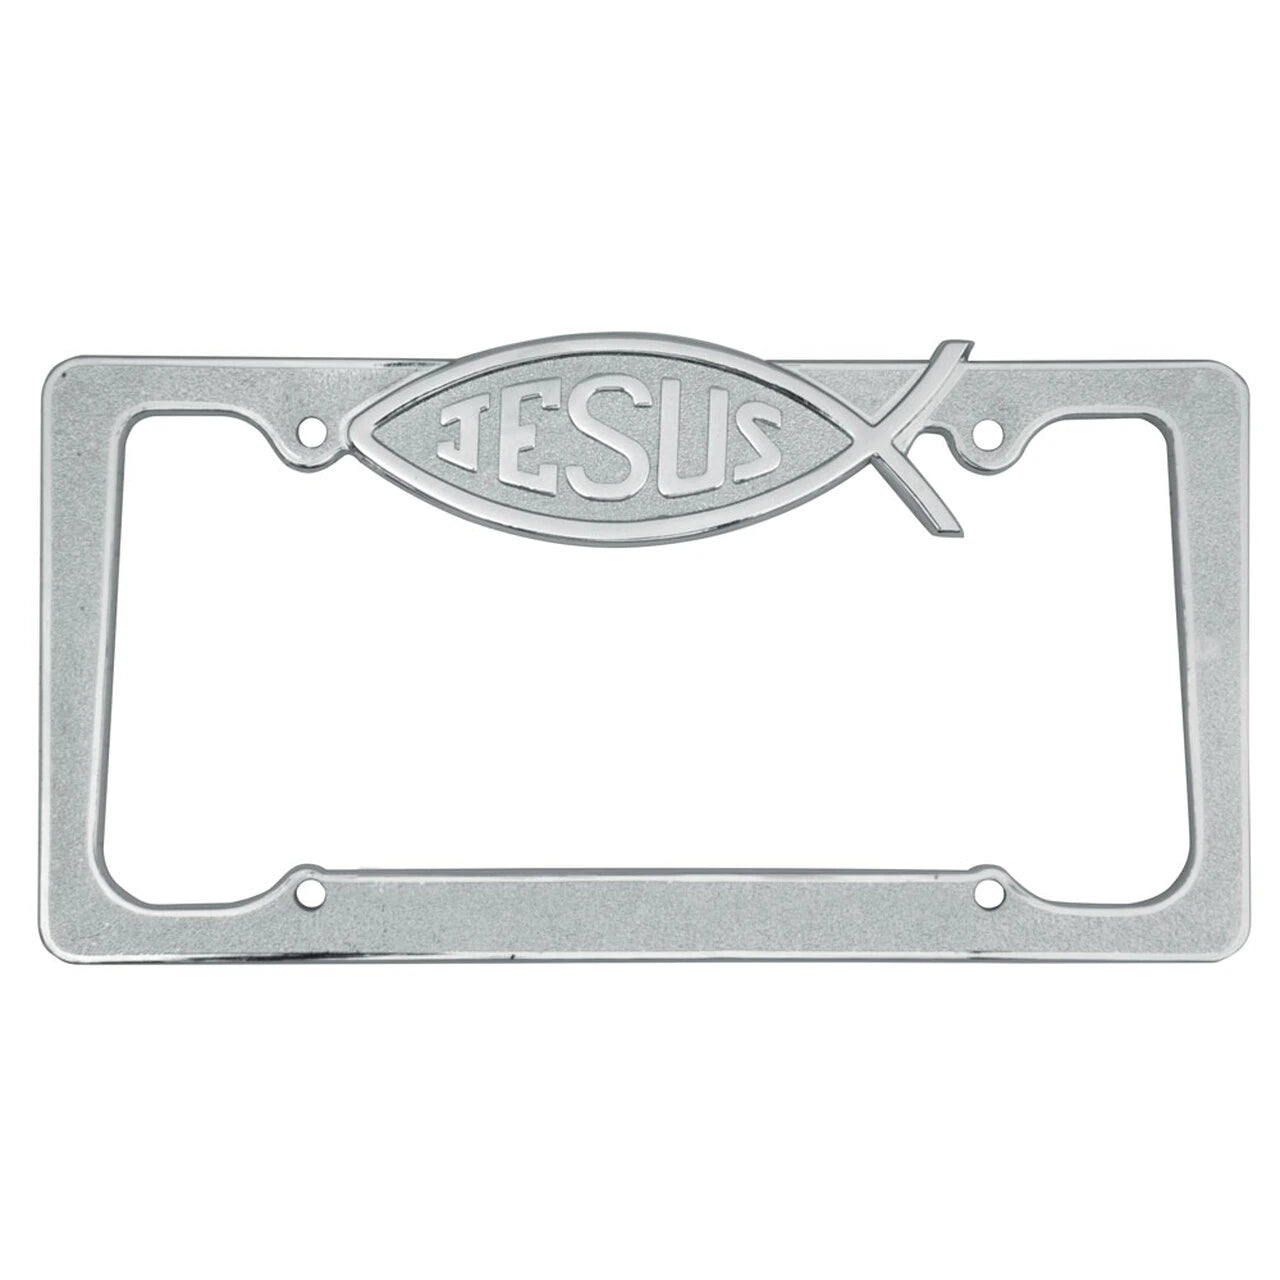 Chrome Plated Rust-Proof Die-Cast Stainless Metal License Plate Frame/Holder Universal Size - Jesus Fish (Pack of 2)